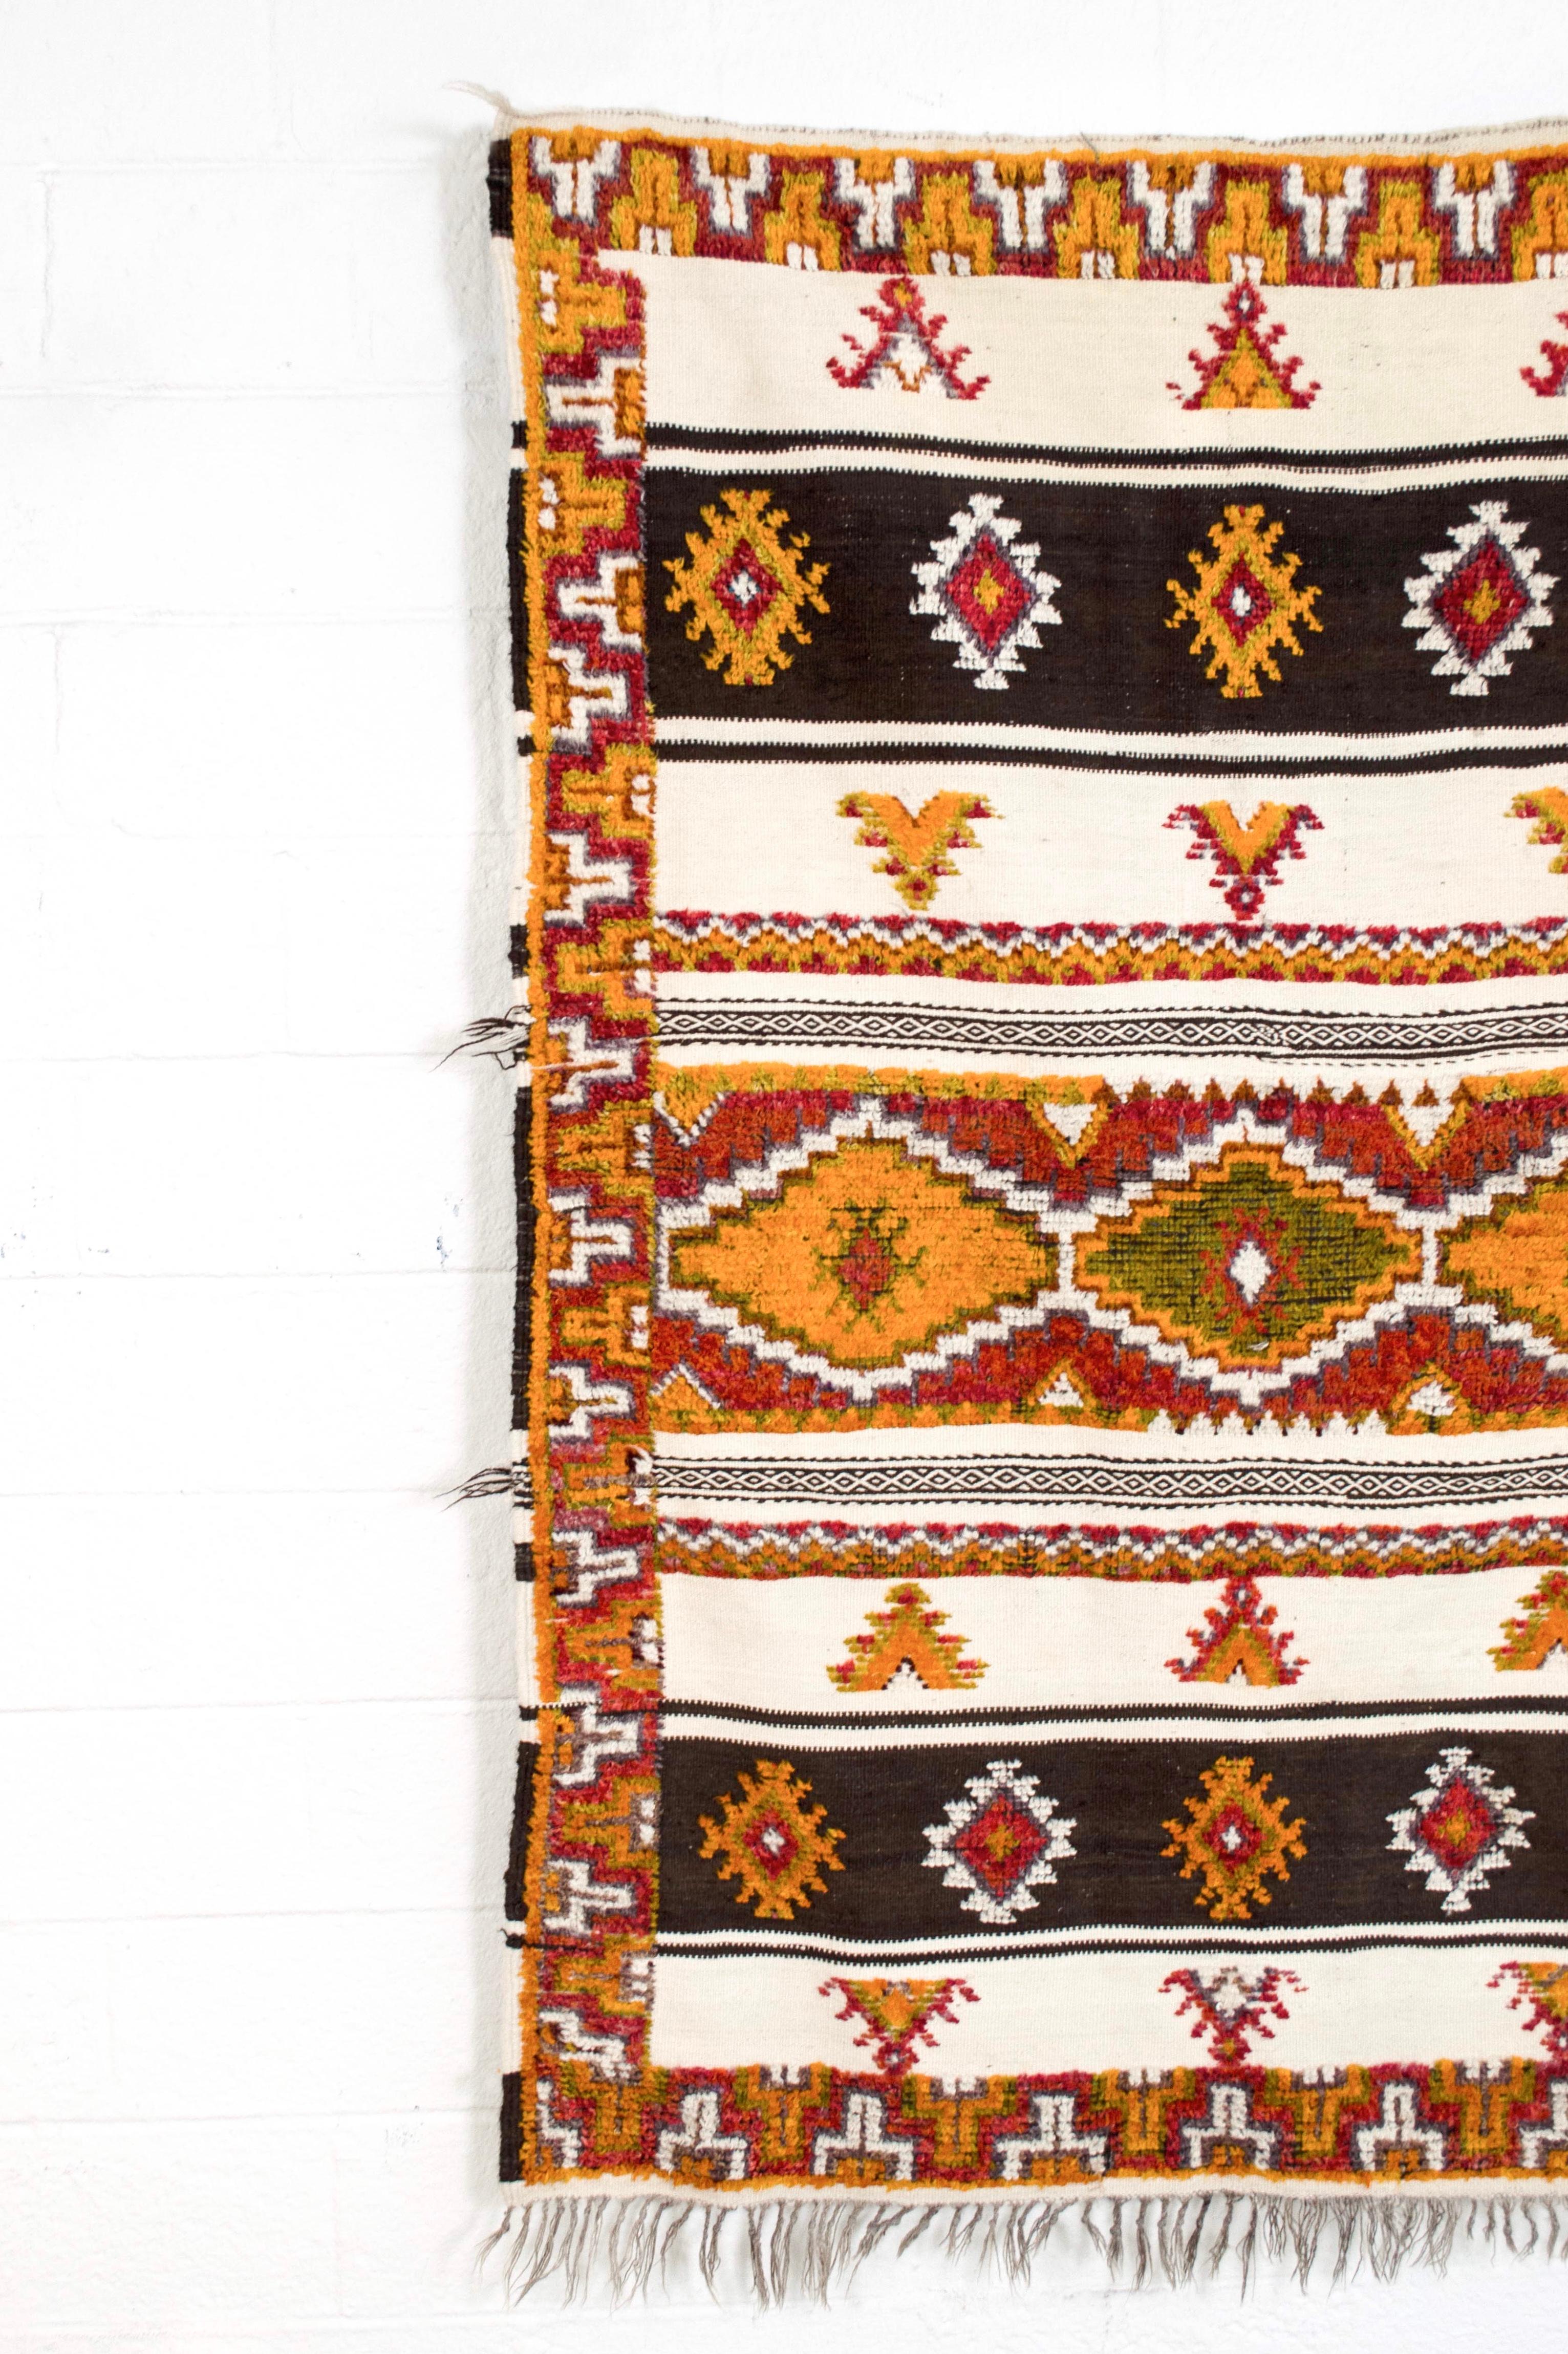 This beautiful vintage handwoven Moroccan Berber rug is circa mid-20th century. It features a symmetrical banded geometric design infused with tribal symbolism in gorgeous shades of orange, red, pink, green, gray, brown and cream with gray fringe to